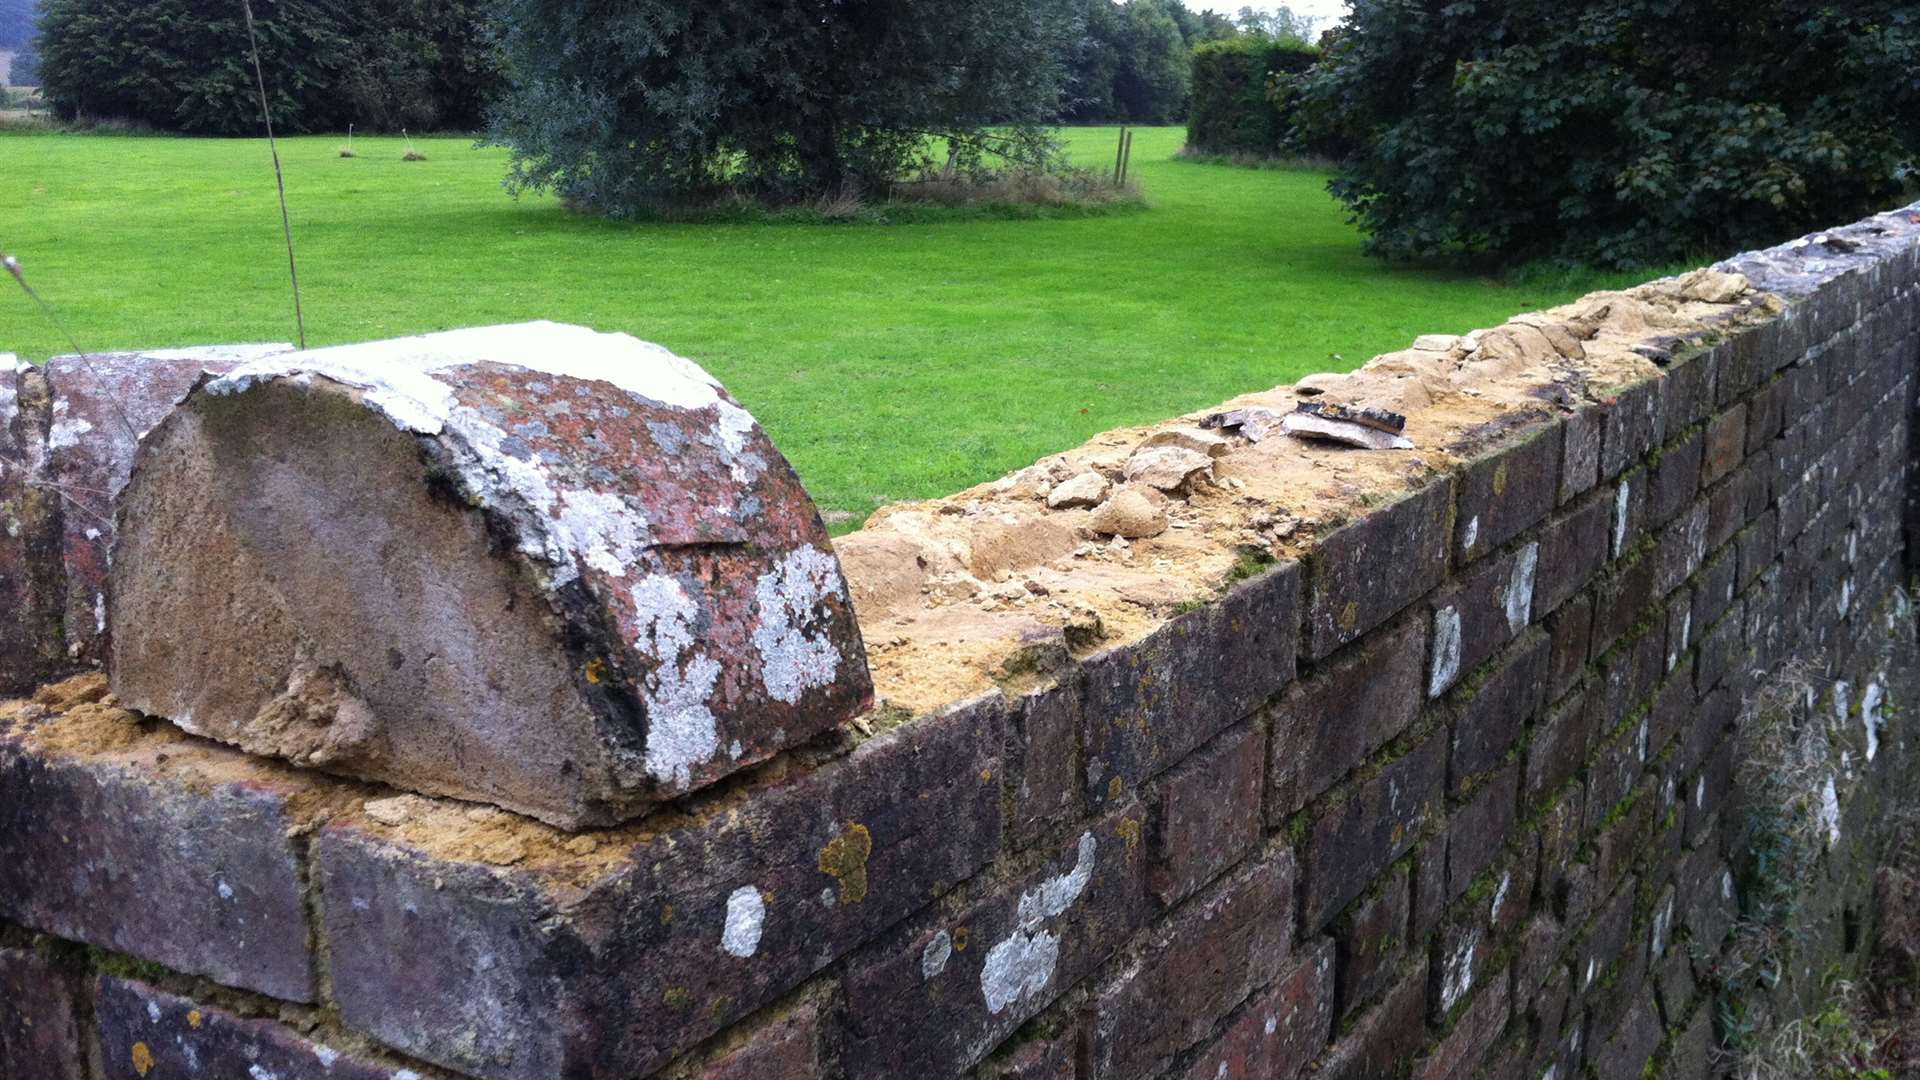 Thieves have taken the coping stones